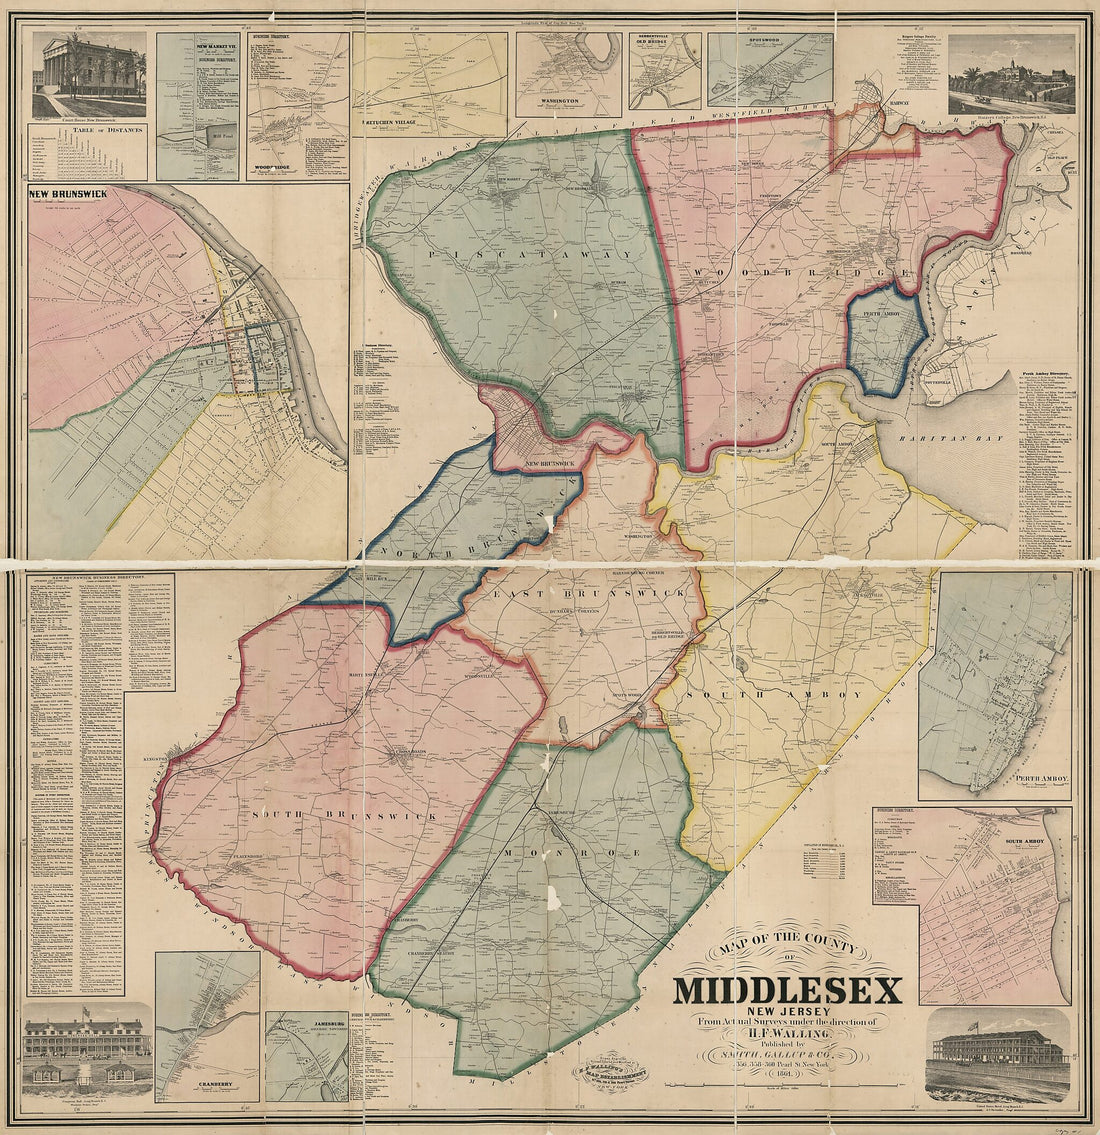 This old map of Map of the County of Middlesex, New Jersey : from Actual Surveys from 1861 was created by  H.F. Walling&